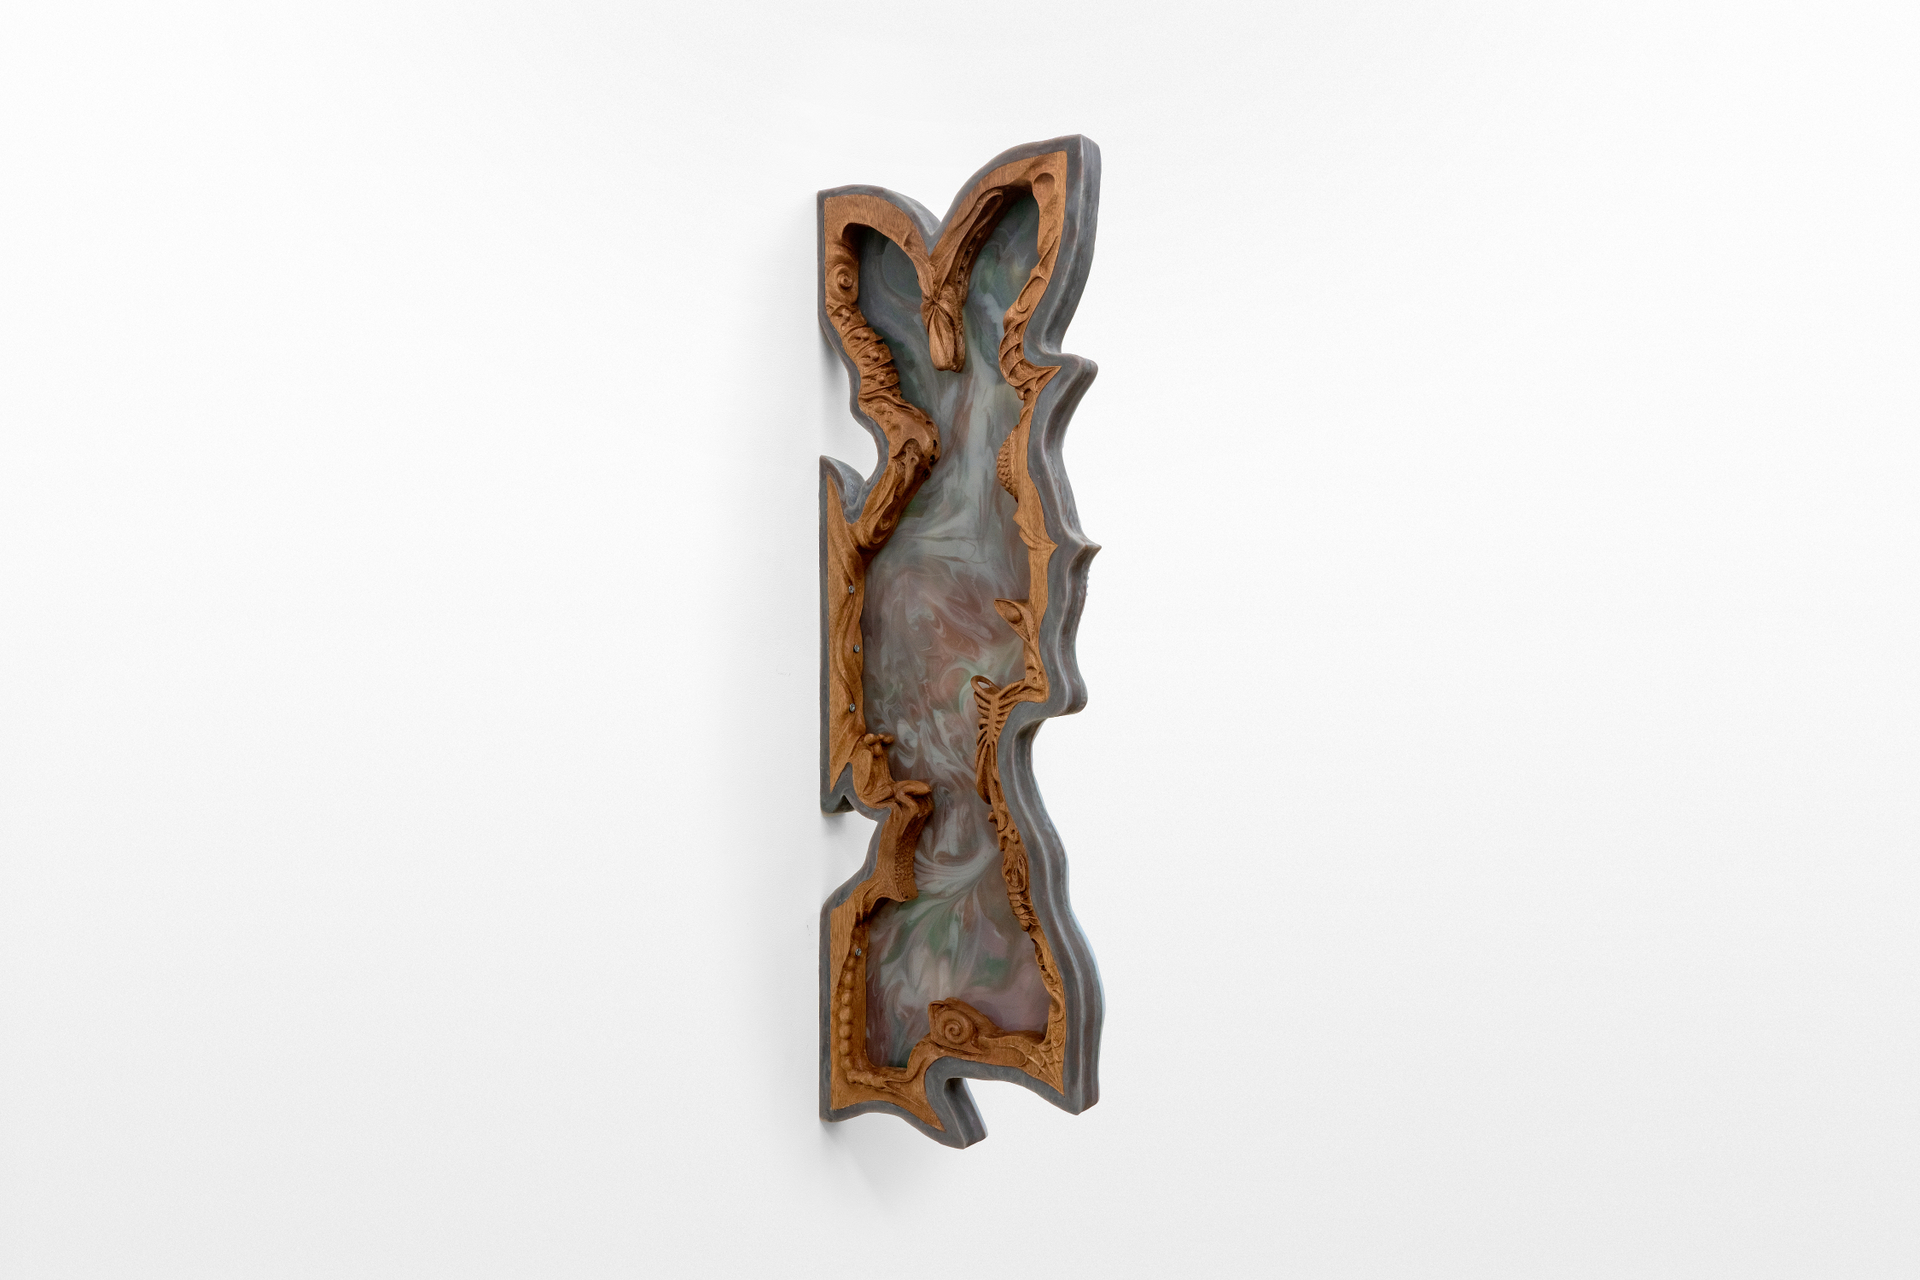 Asma, Love’s An Imagined Body Which Contains No Substance, 2022, Platinum silicone, banak wood, 108 × 34 × 6 cm